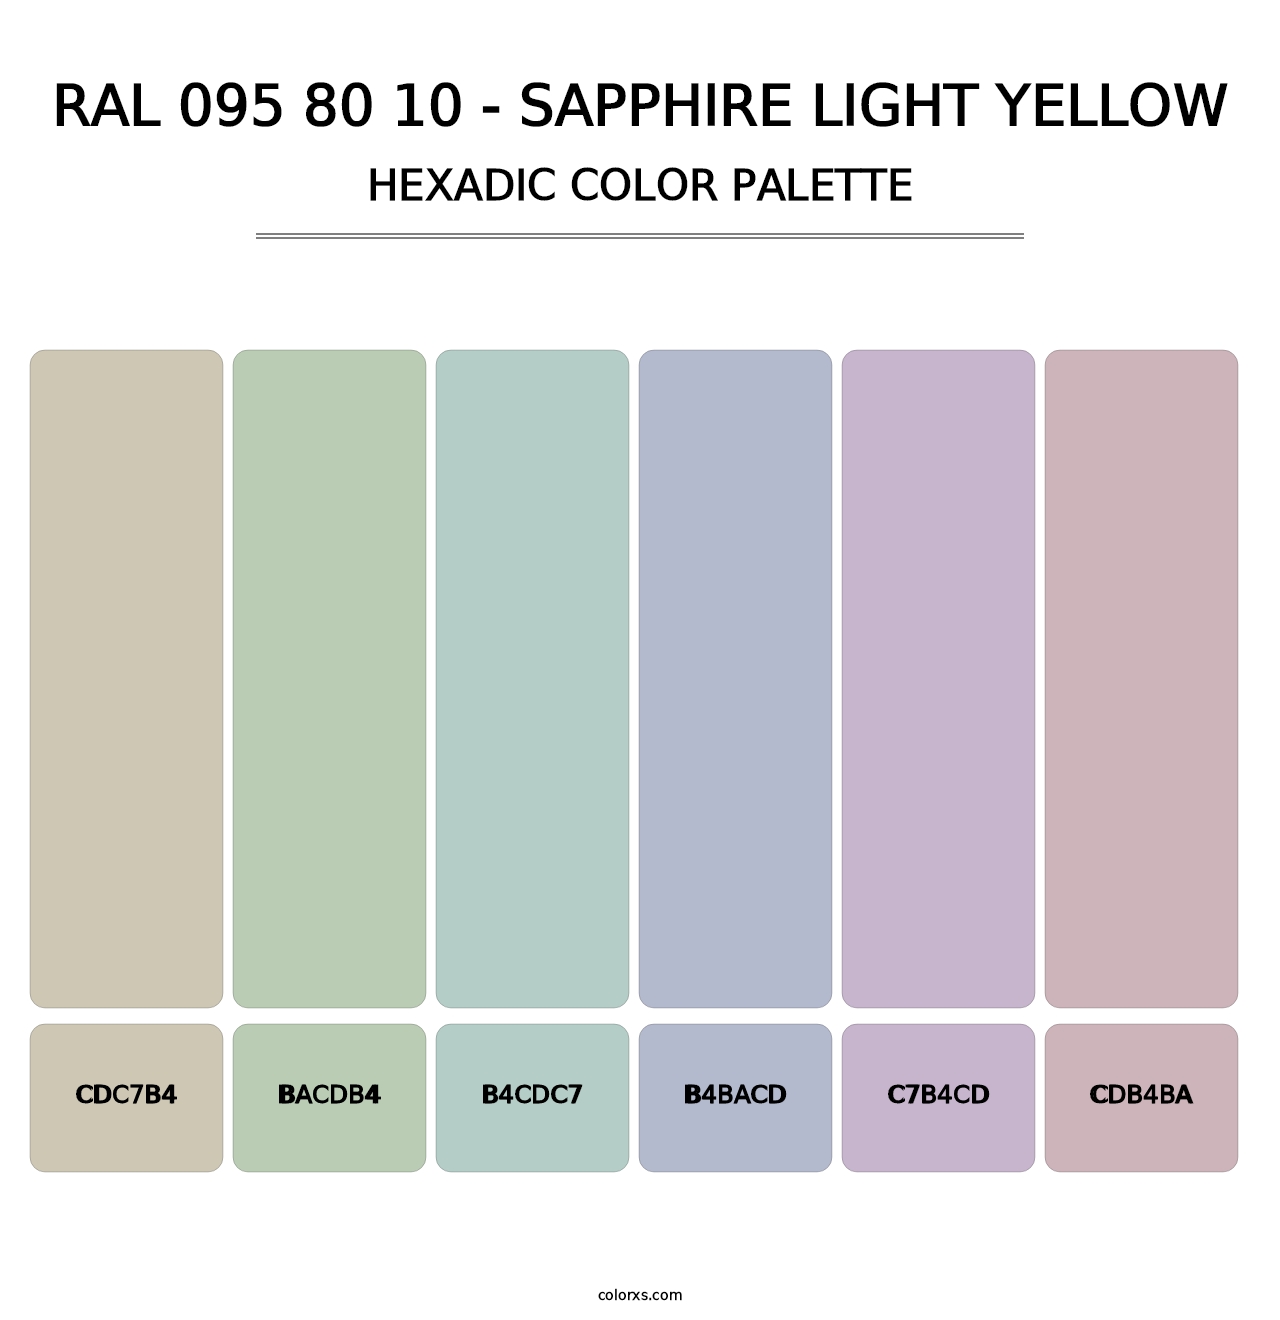 RAL 095 80 10 - Sapphire Light Yellow - Hexadic Color Palette